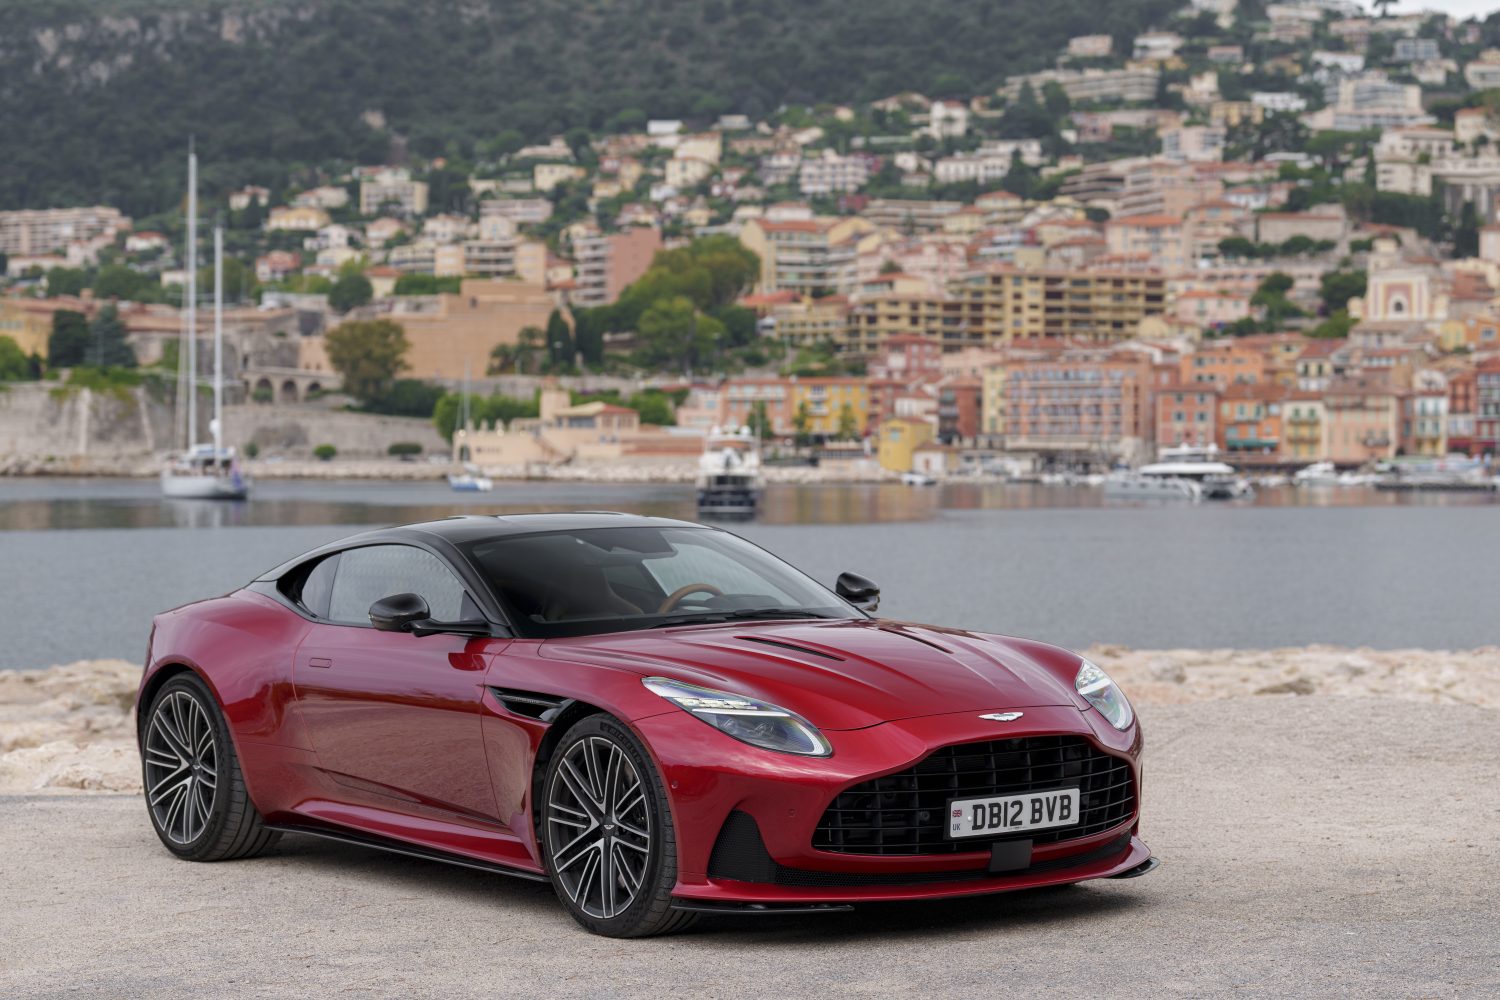 The Aston Martin DB12 in hyper red, parked across the river of a coastline village